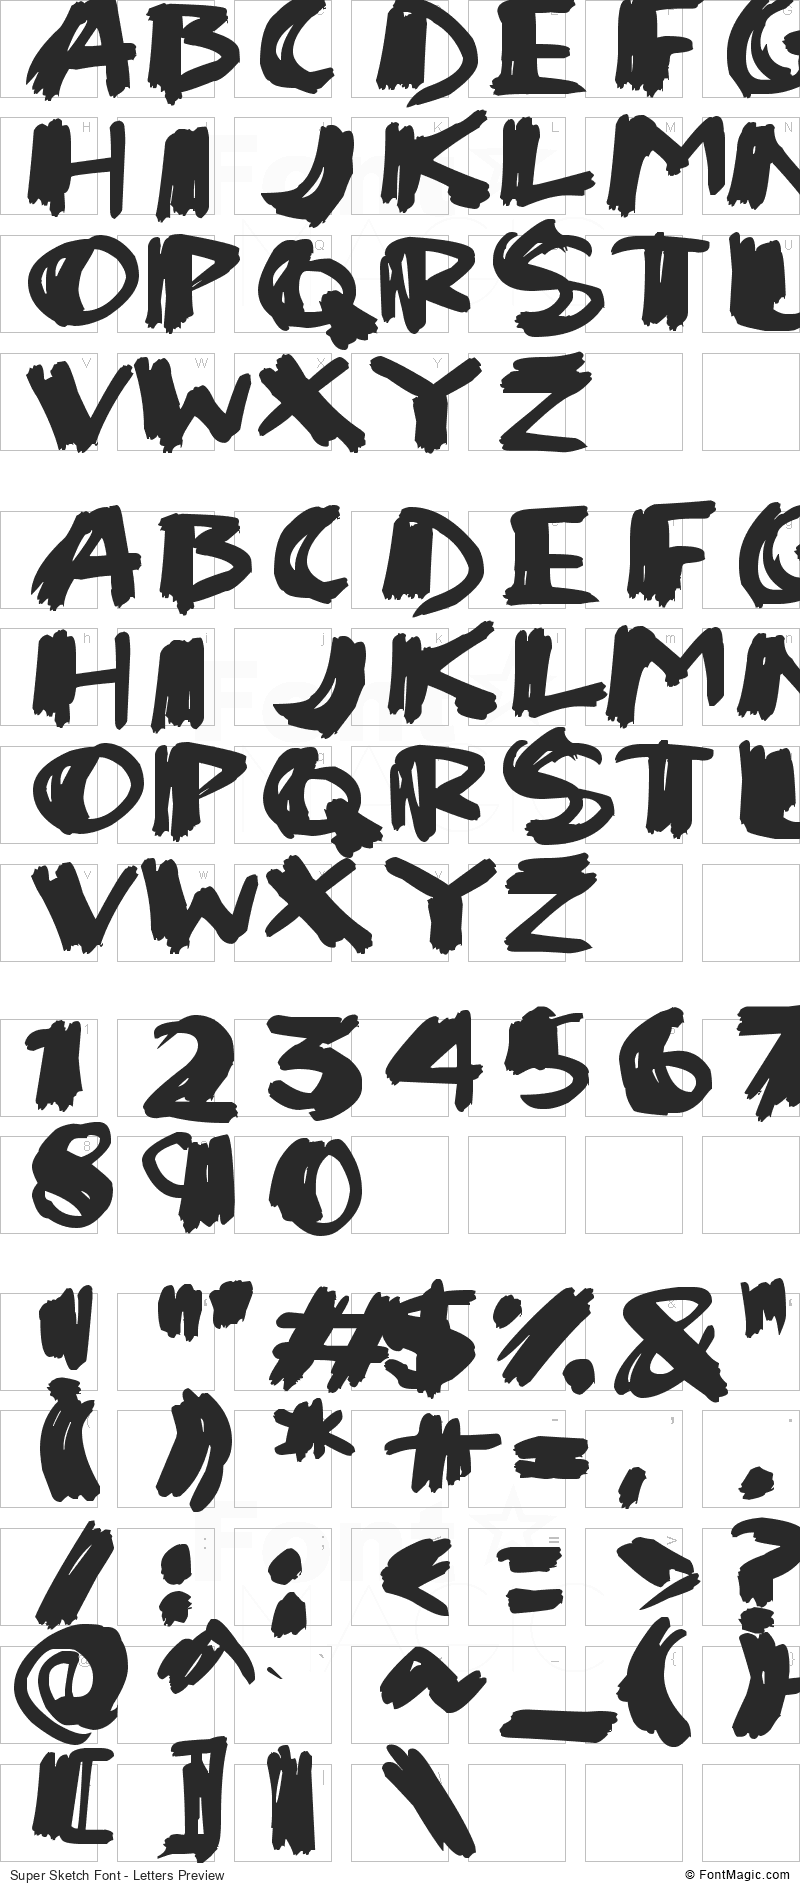 Super Sketch Font - All Latters Preview Chart